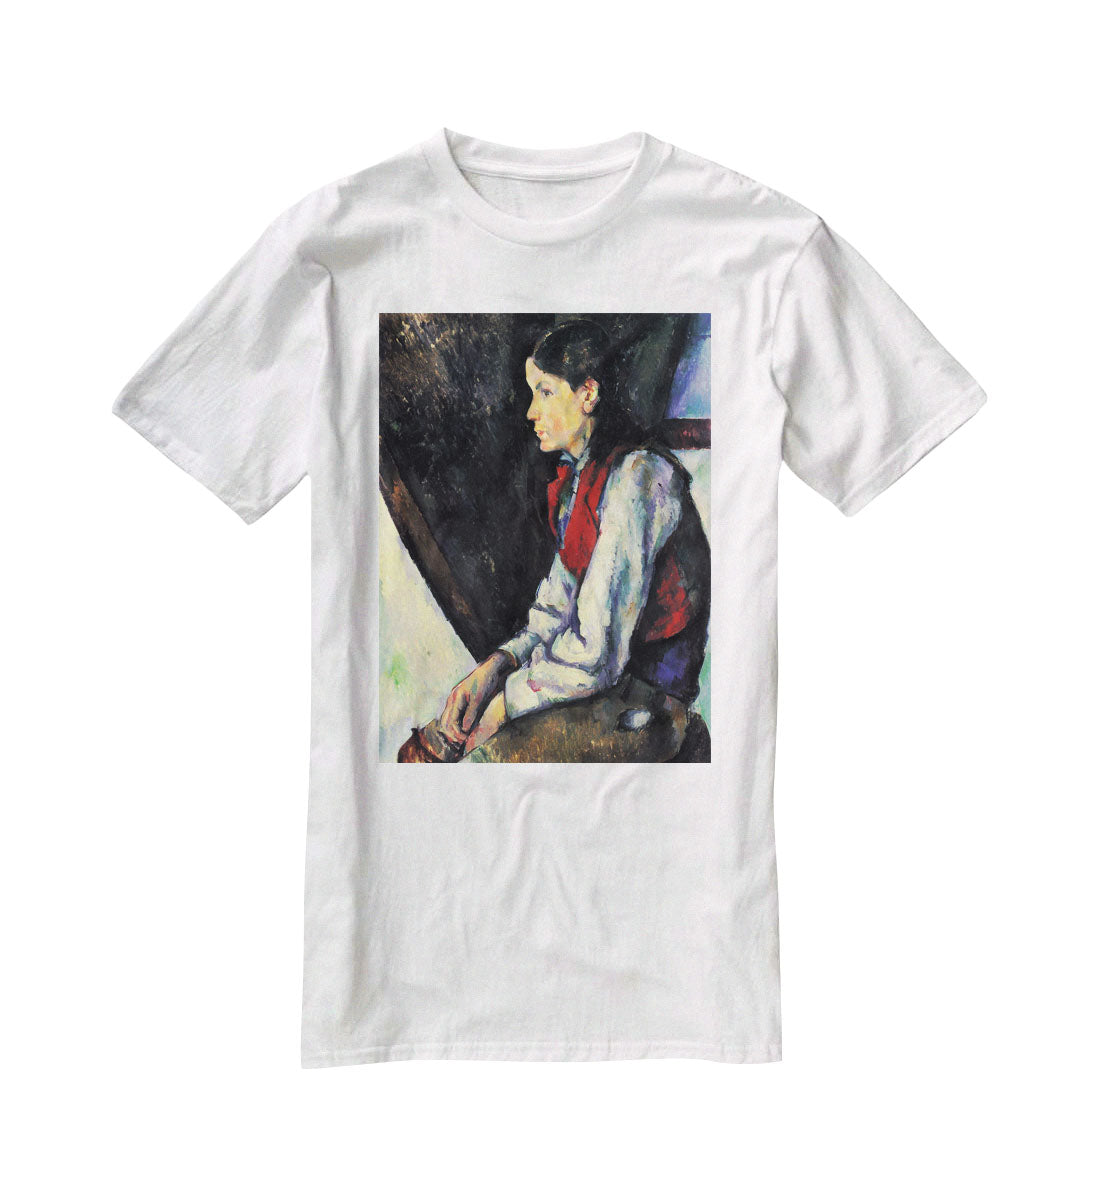 Boy with Red Vest by Cezanne T-Shirt - Canvas Art Rocks - 5